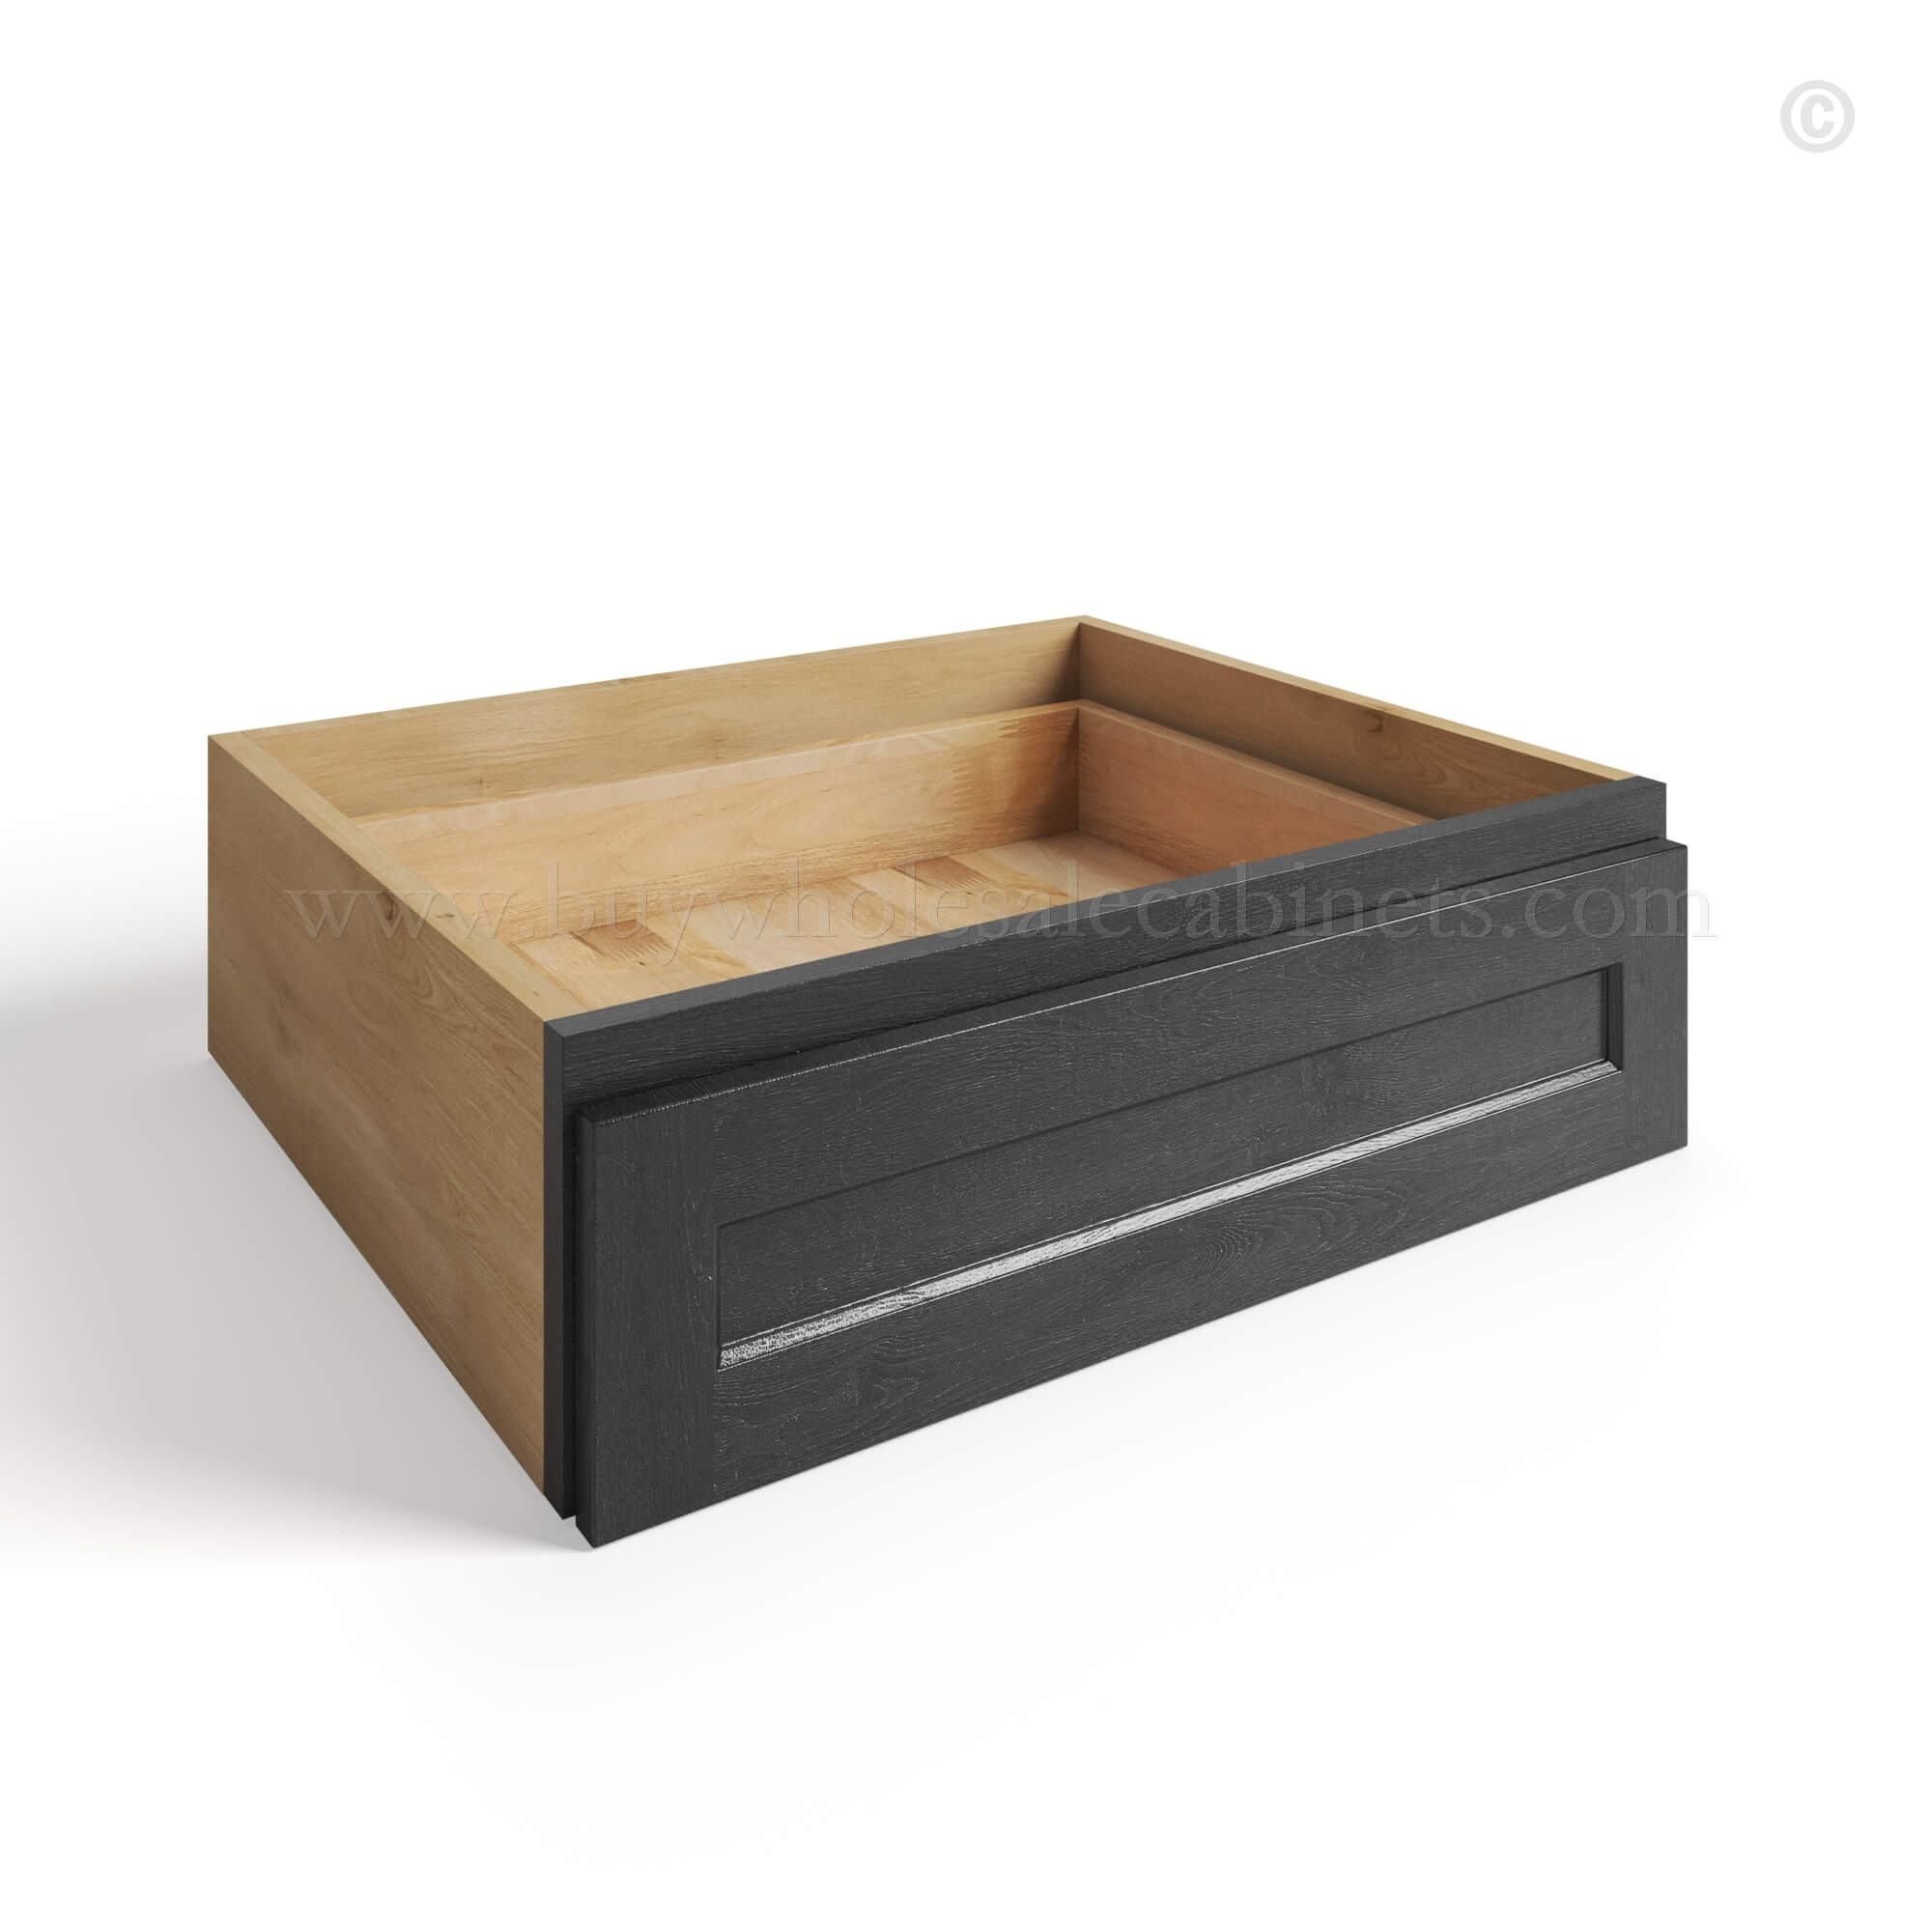 charcoal black shaker vanity knee drawer with single drawer, rta cabinets, wholesale cabinets